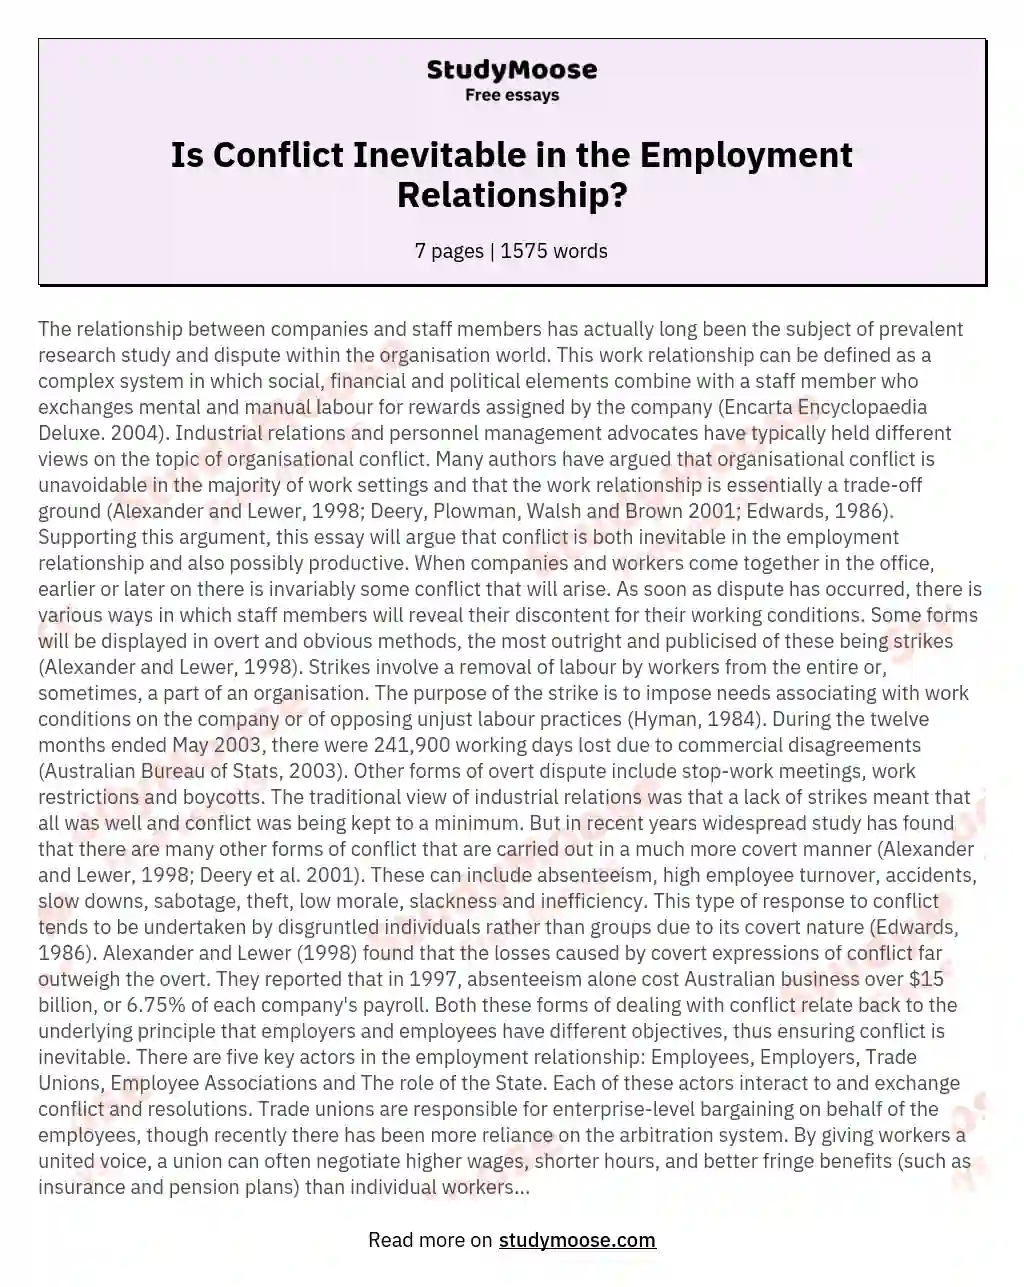 free essay on conflict management